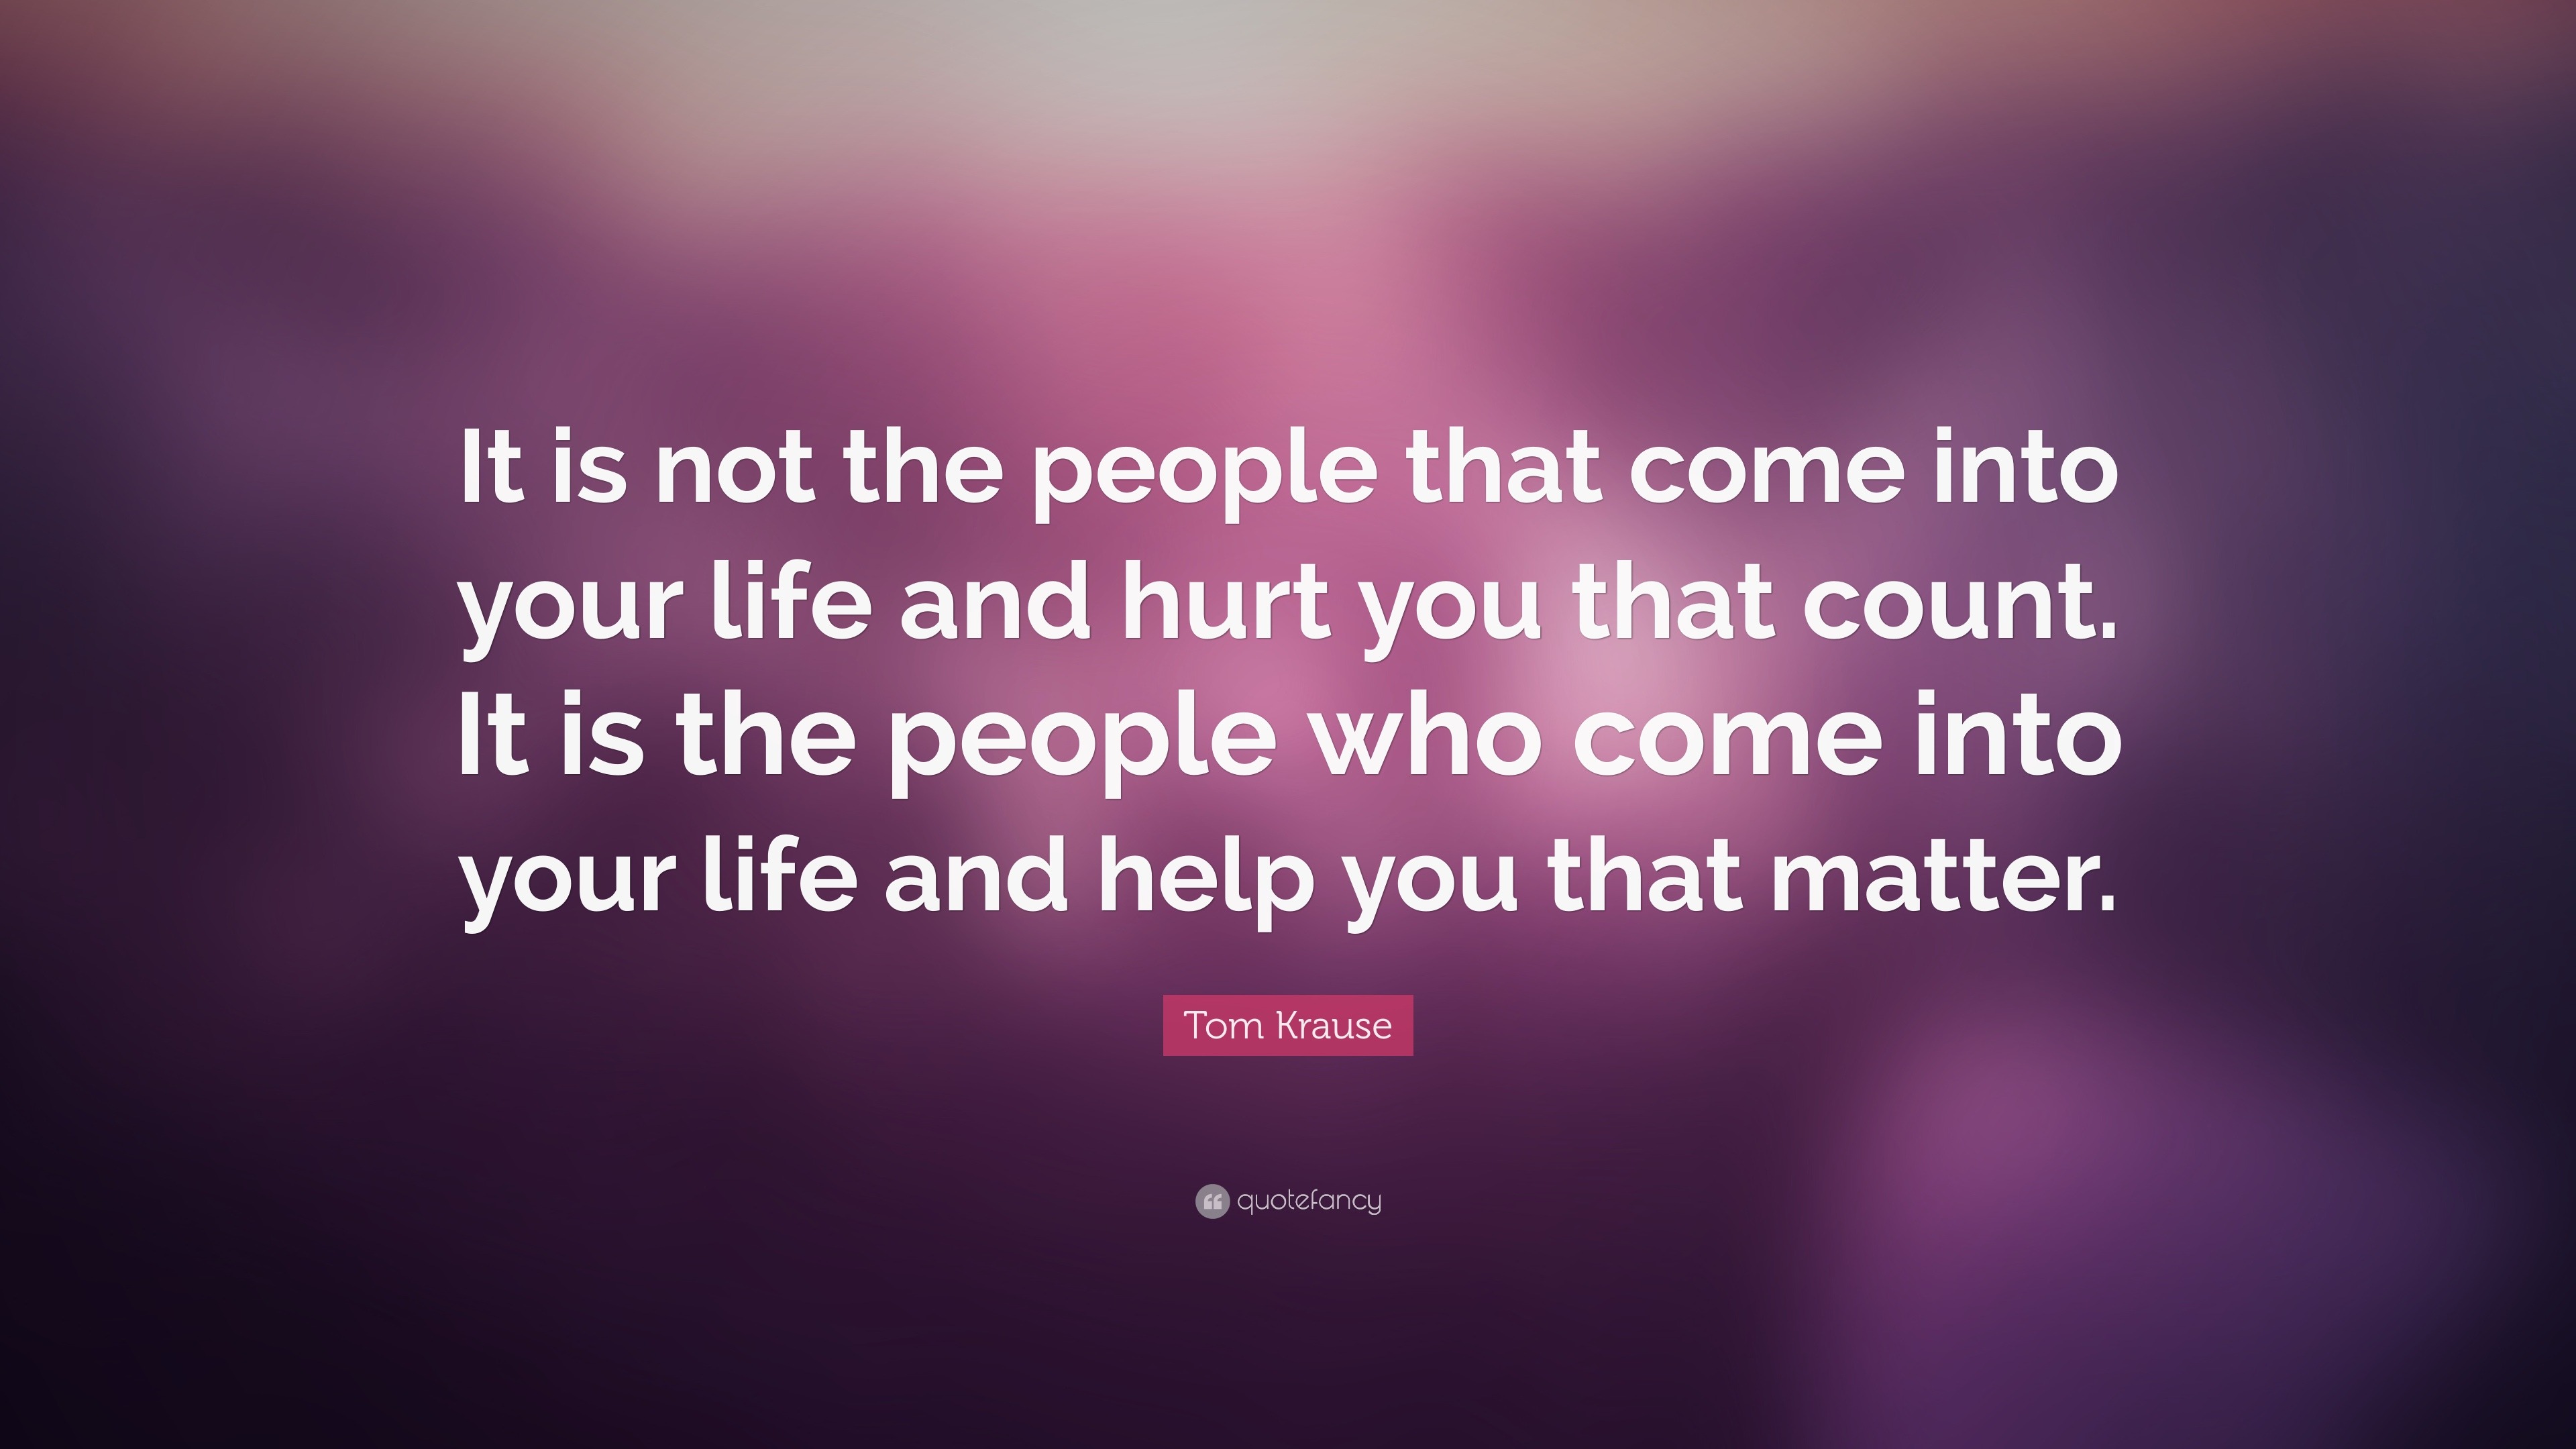 Tom Krause Quote “It is not the people that e into your life and